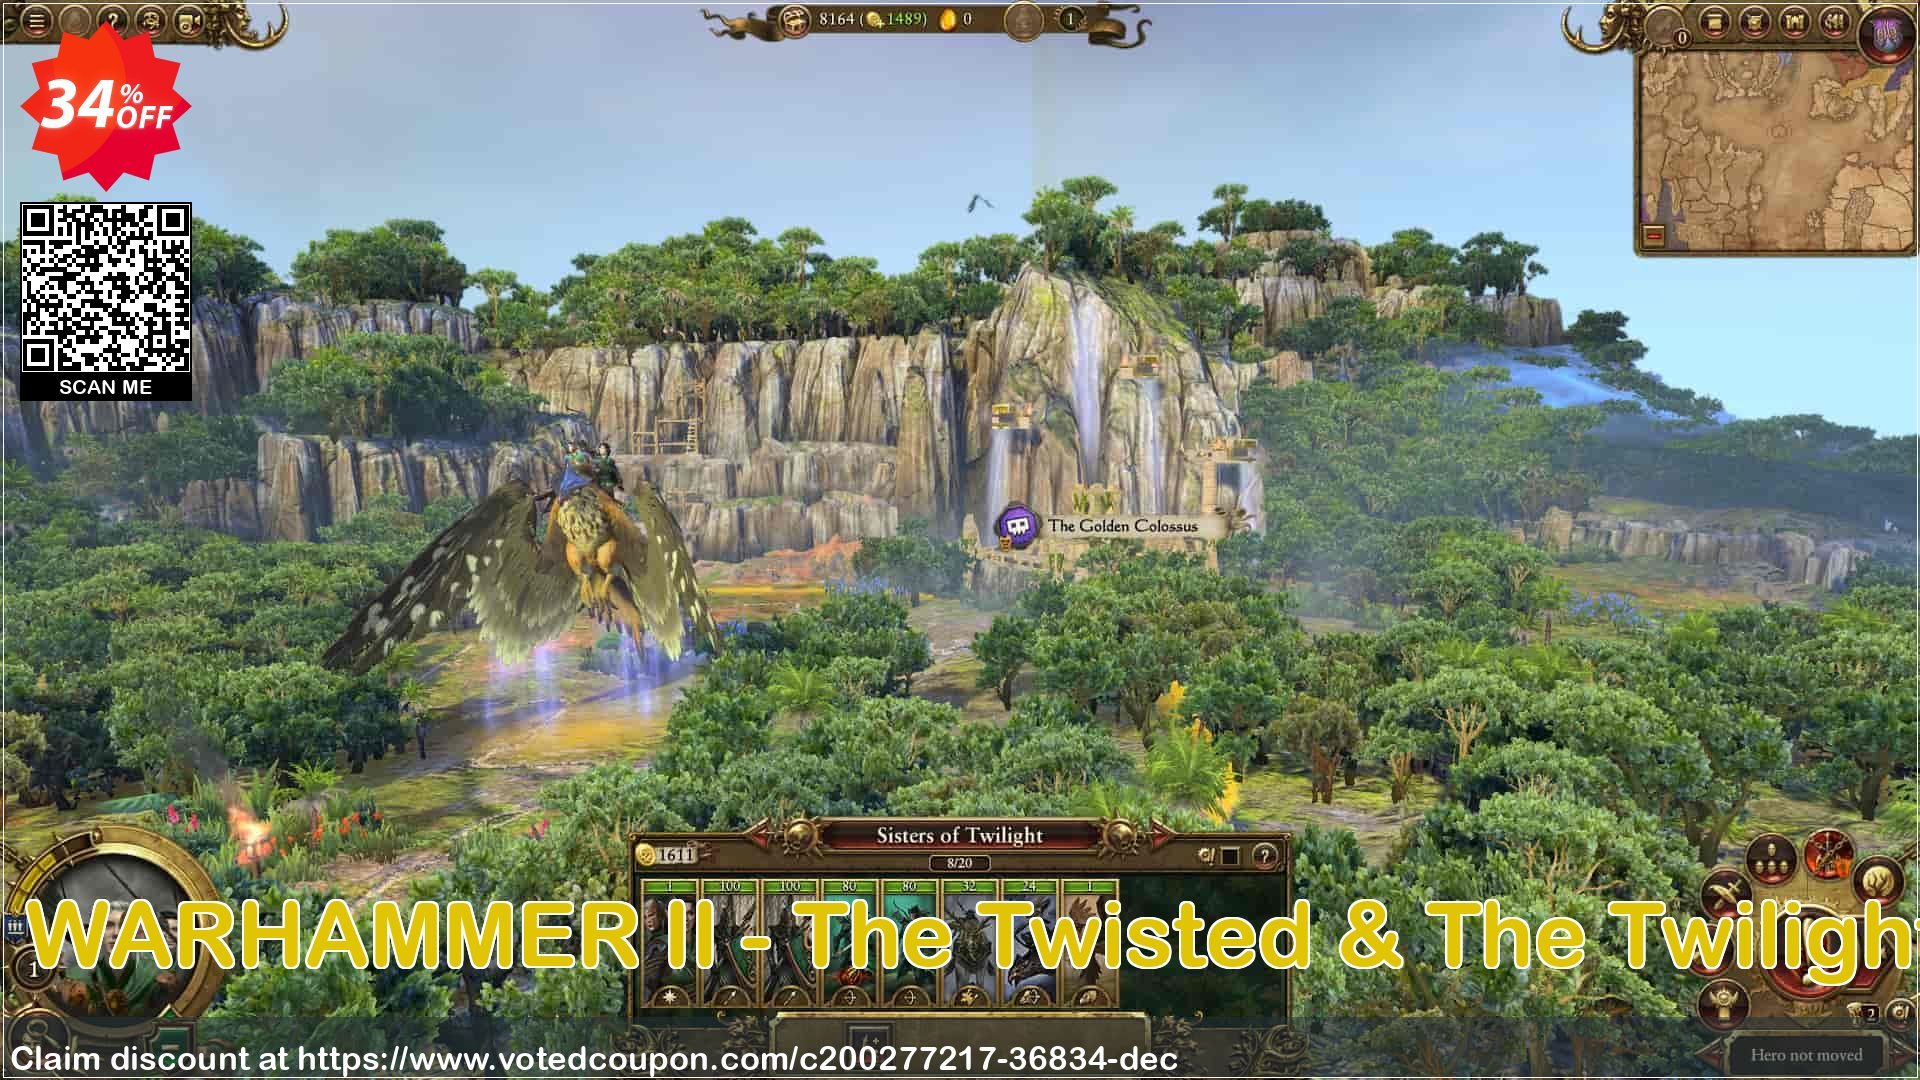 Total War: WARHAMMER II - The Twisted & The Twilight PC - DLC Coupon Code Apr 2024, 34% OFF - VotedCoupon